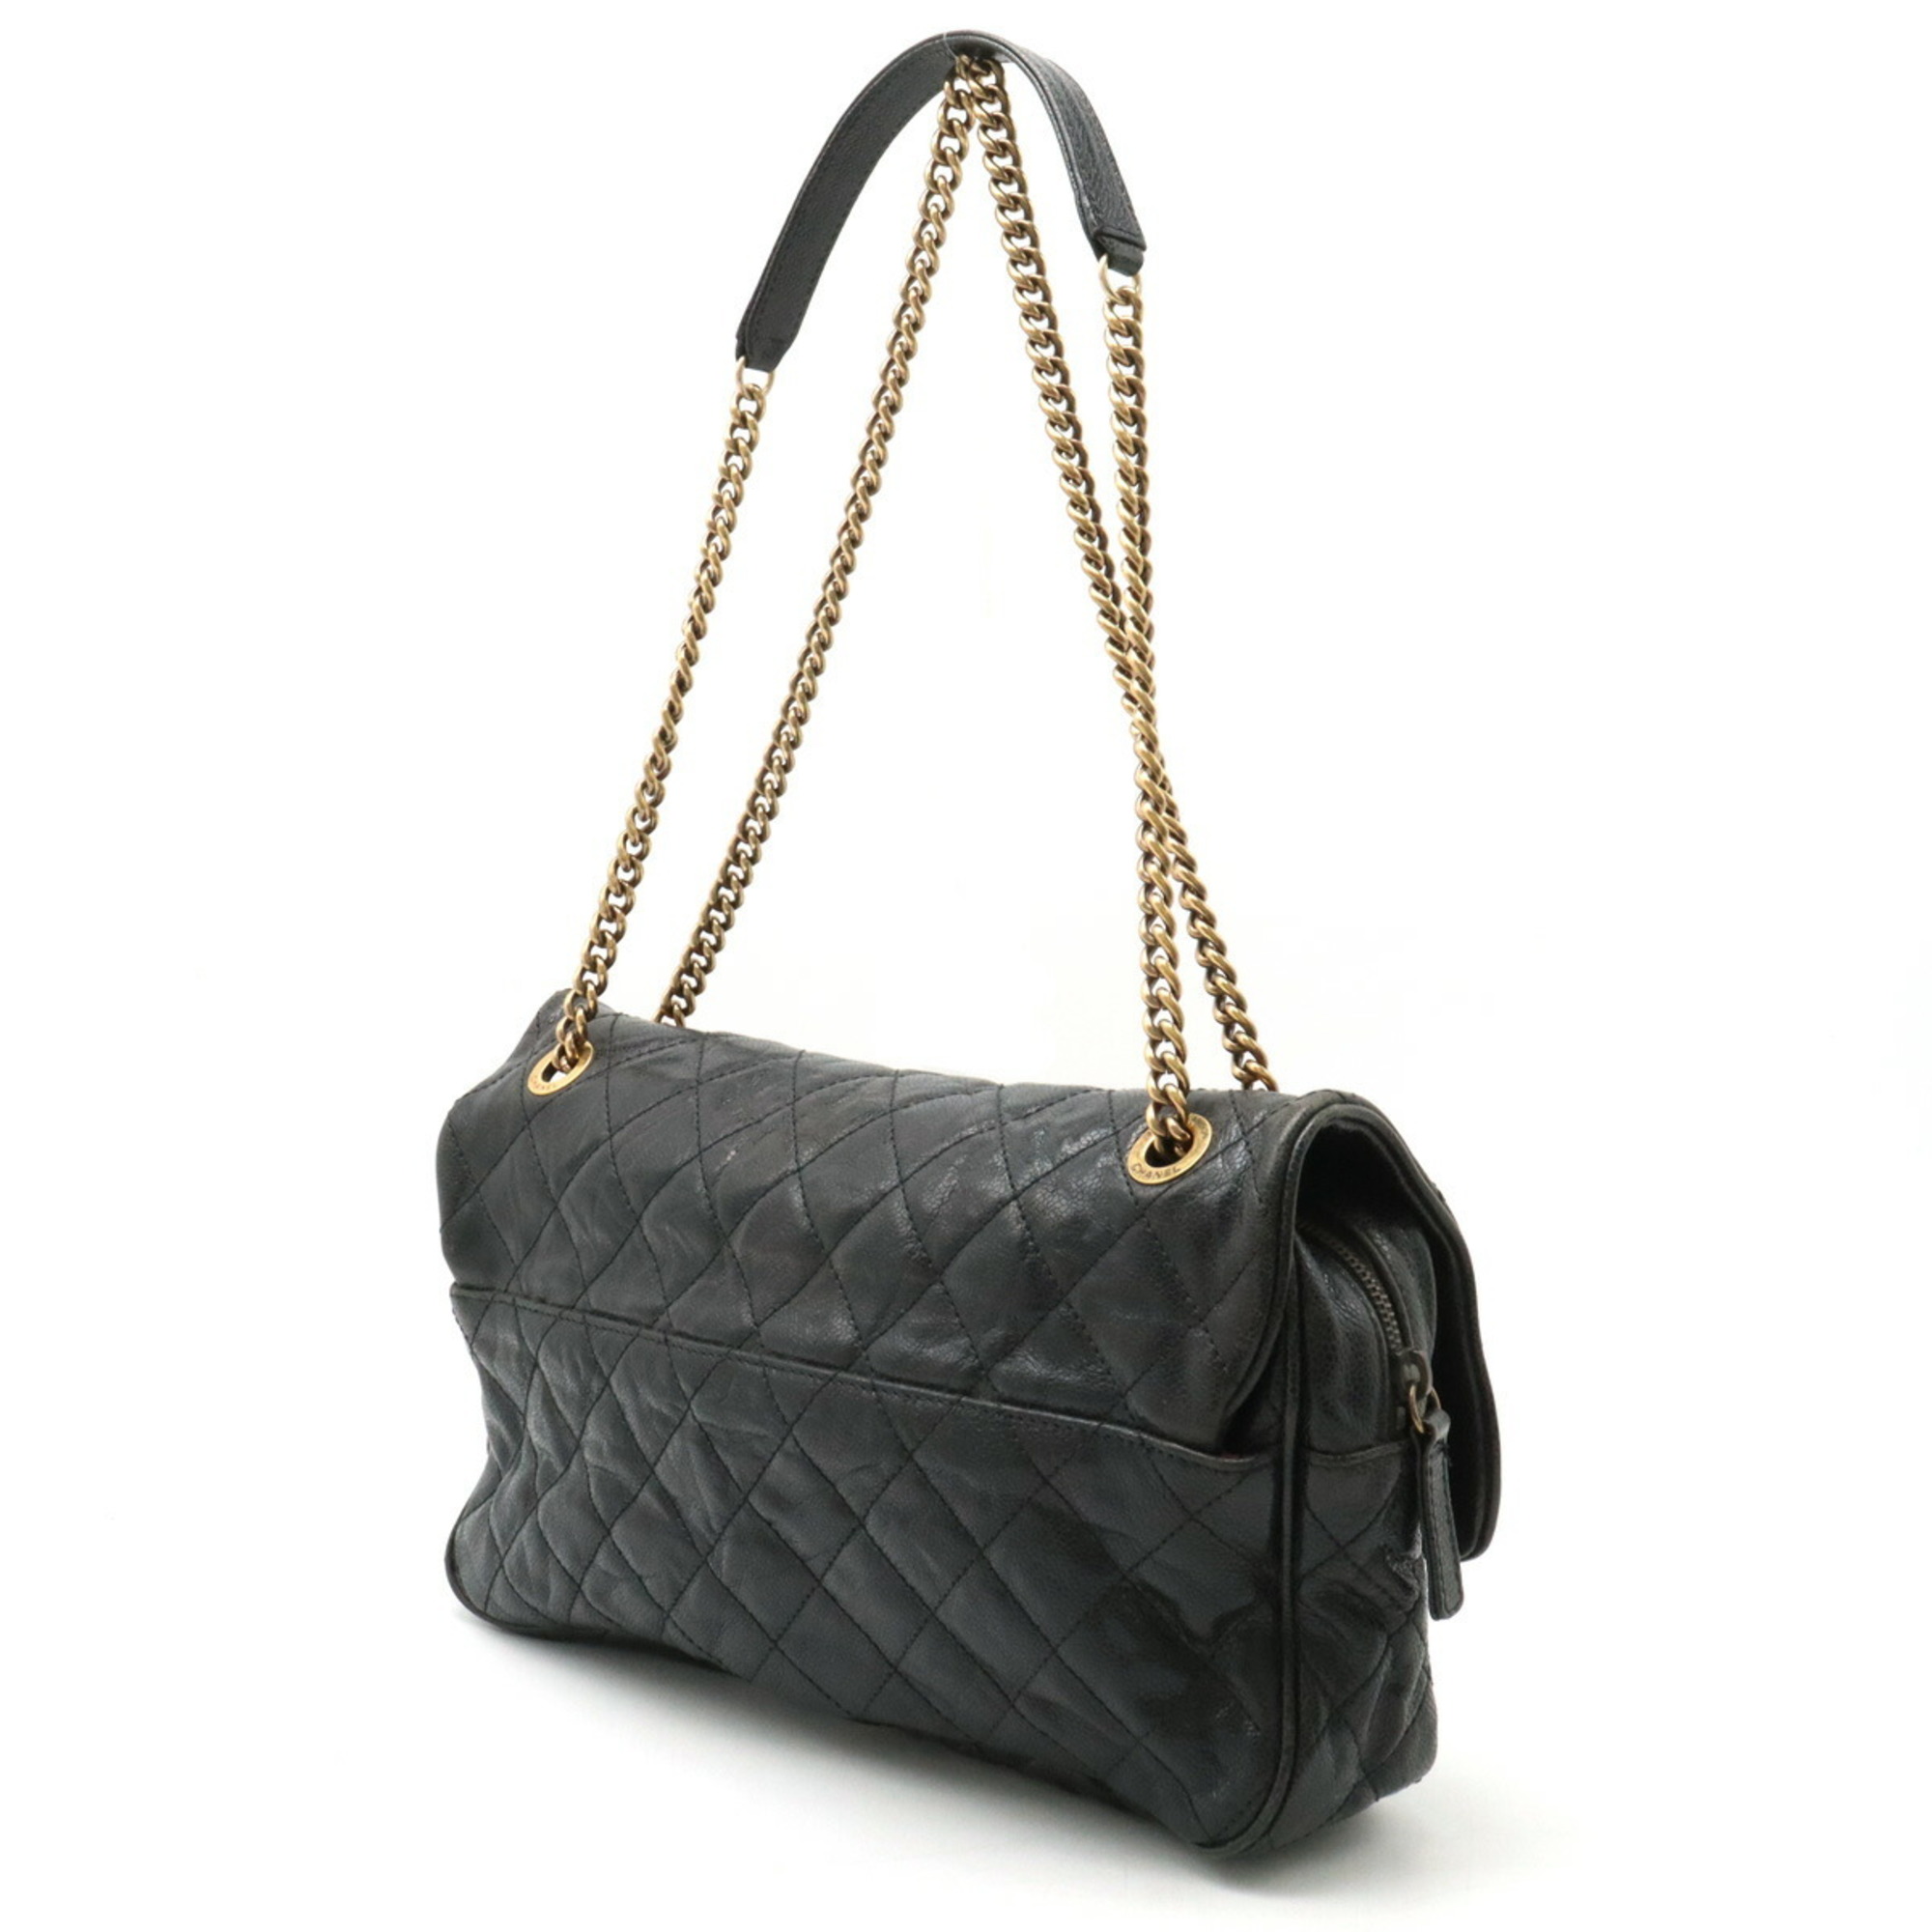 CHANEL Chanel Matelasse Coco Mark Chain Shoulder Bag Double Caviar Skin Leather Black Processing